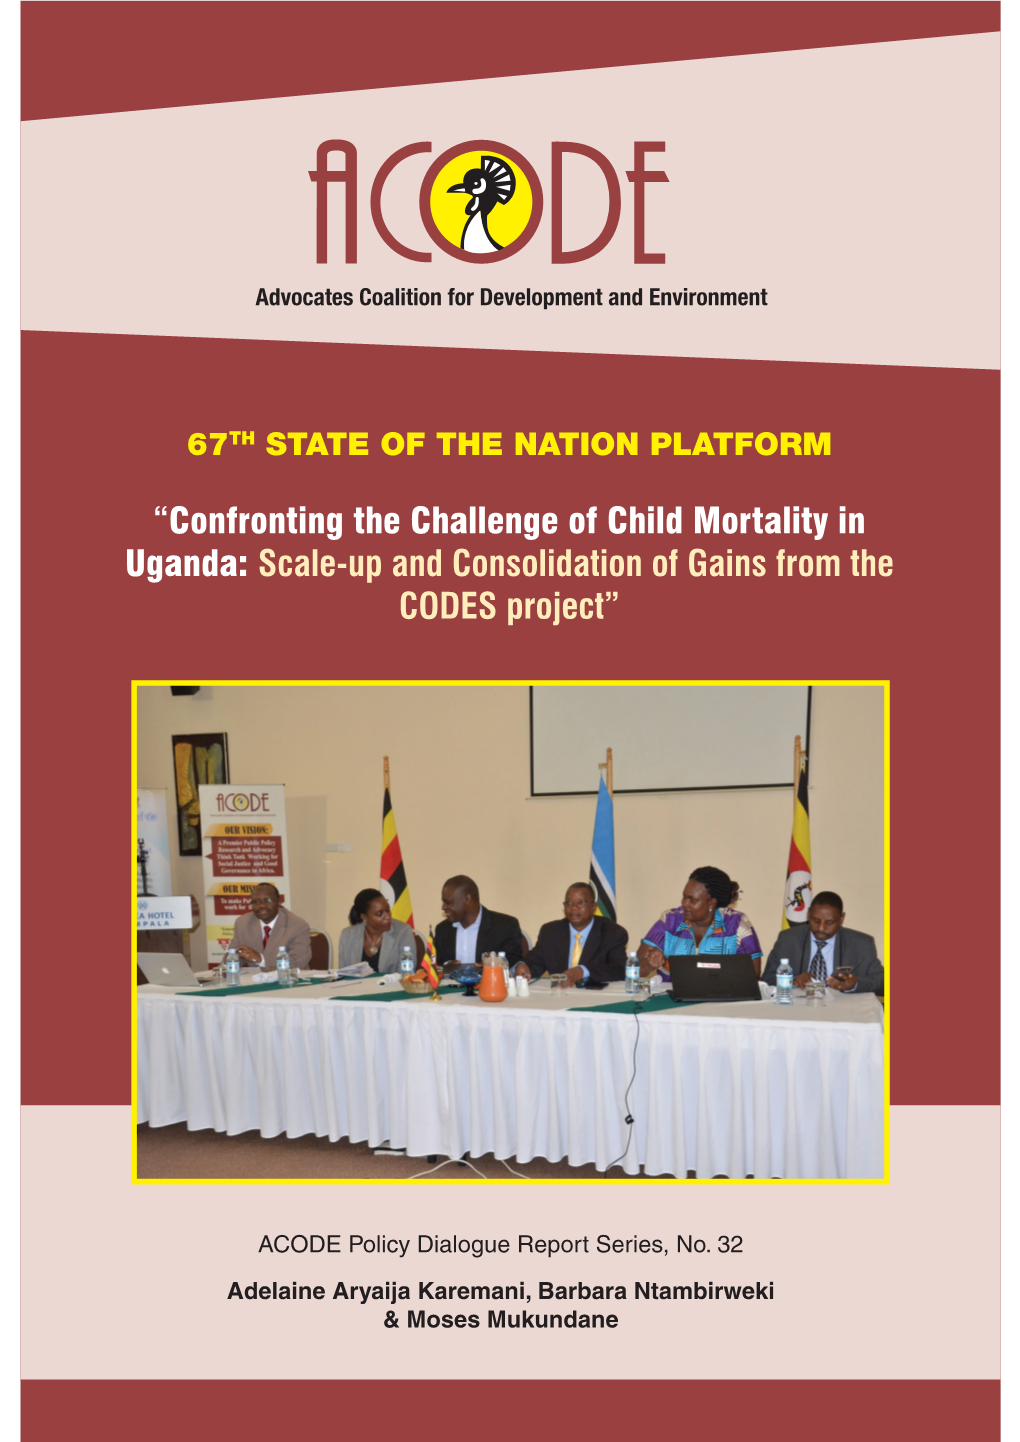 Confronting the Challenge of Child Mortality in Uganda: Scale-Up and Consolidation of Gains from the CODES Project”